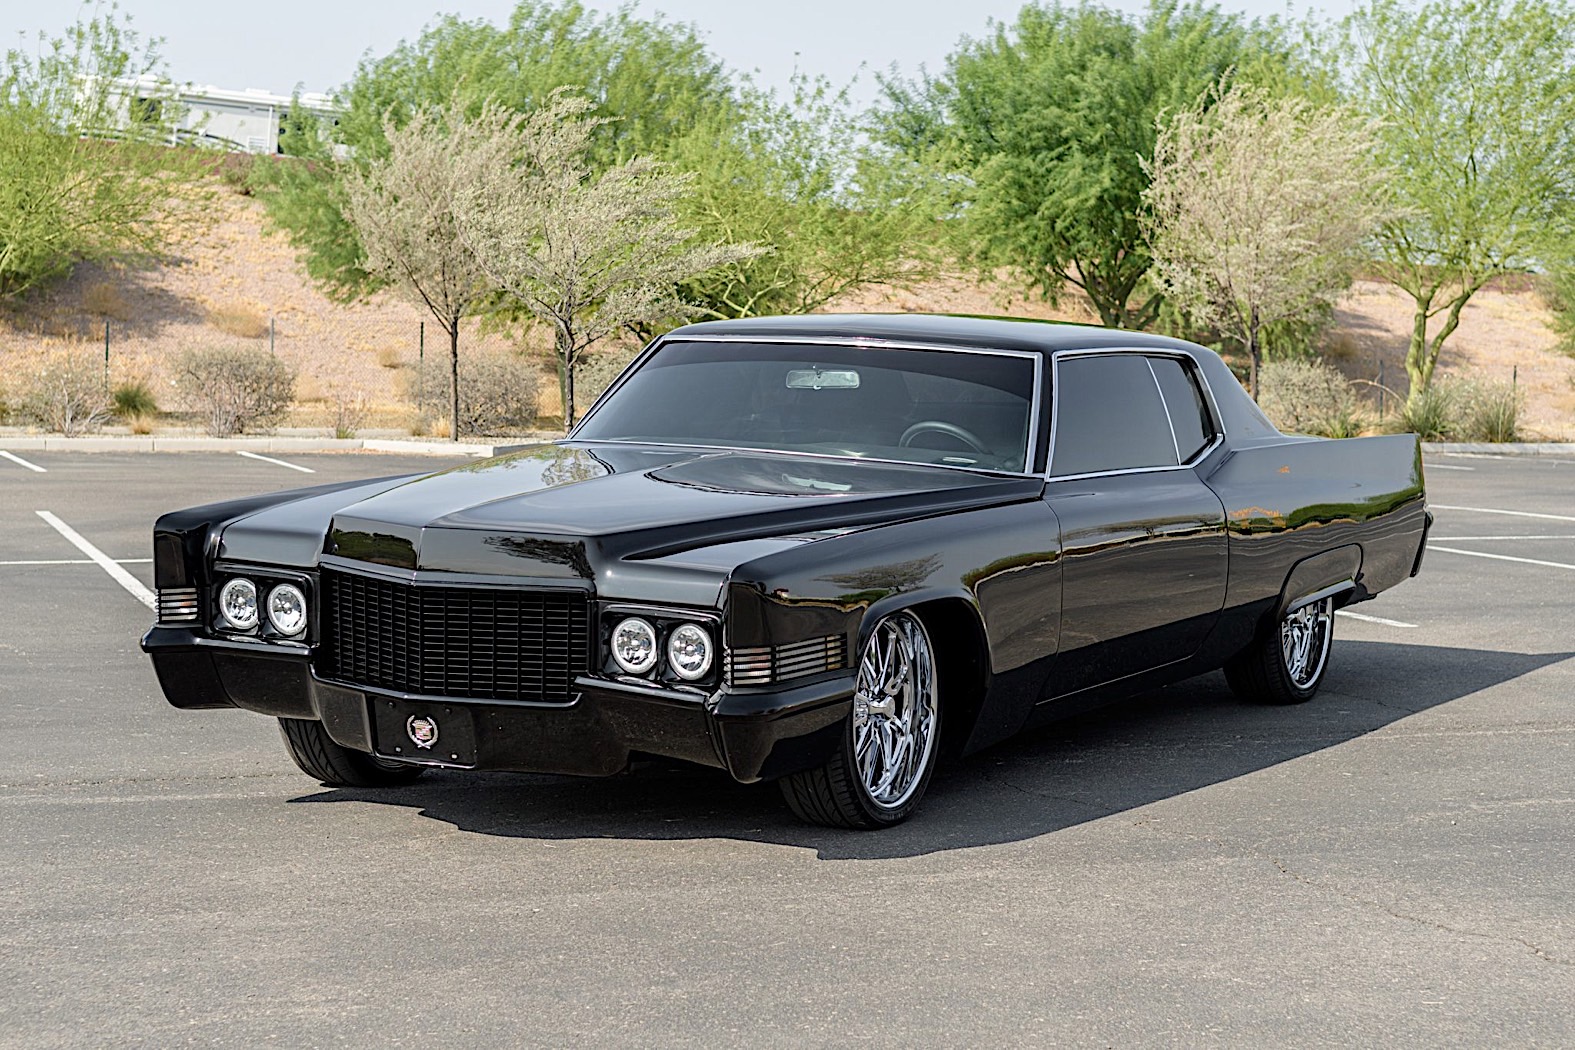 Shaved 1970 Cadillac Coupe DeVille Is the Black Nightmare in the Rearview Mirror - autoevolution